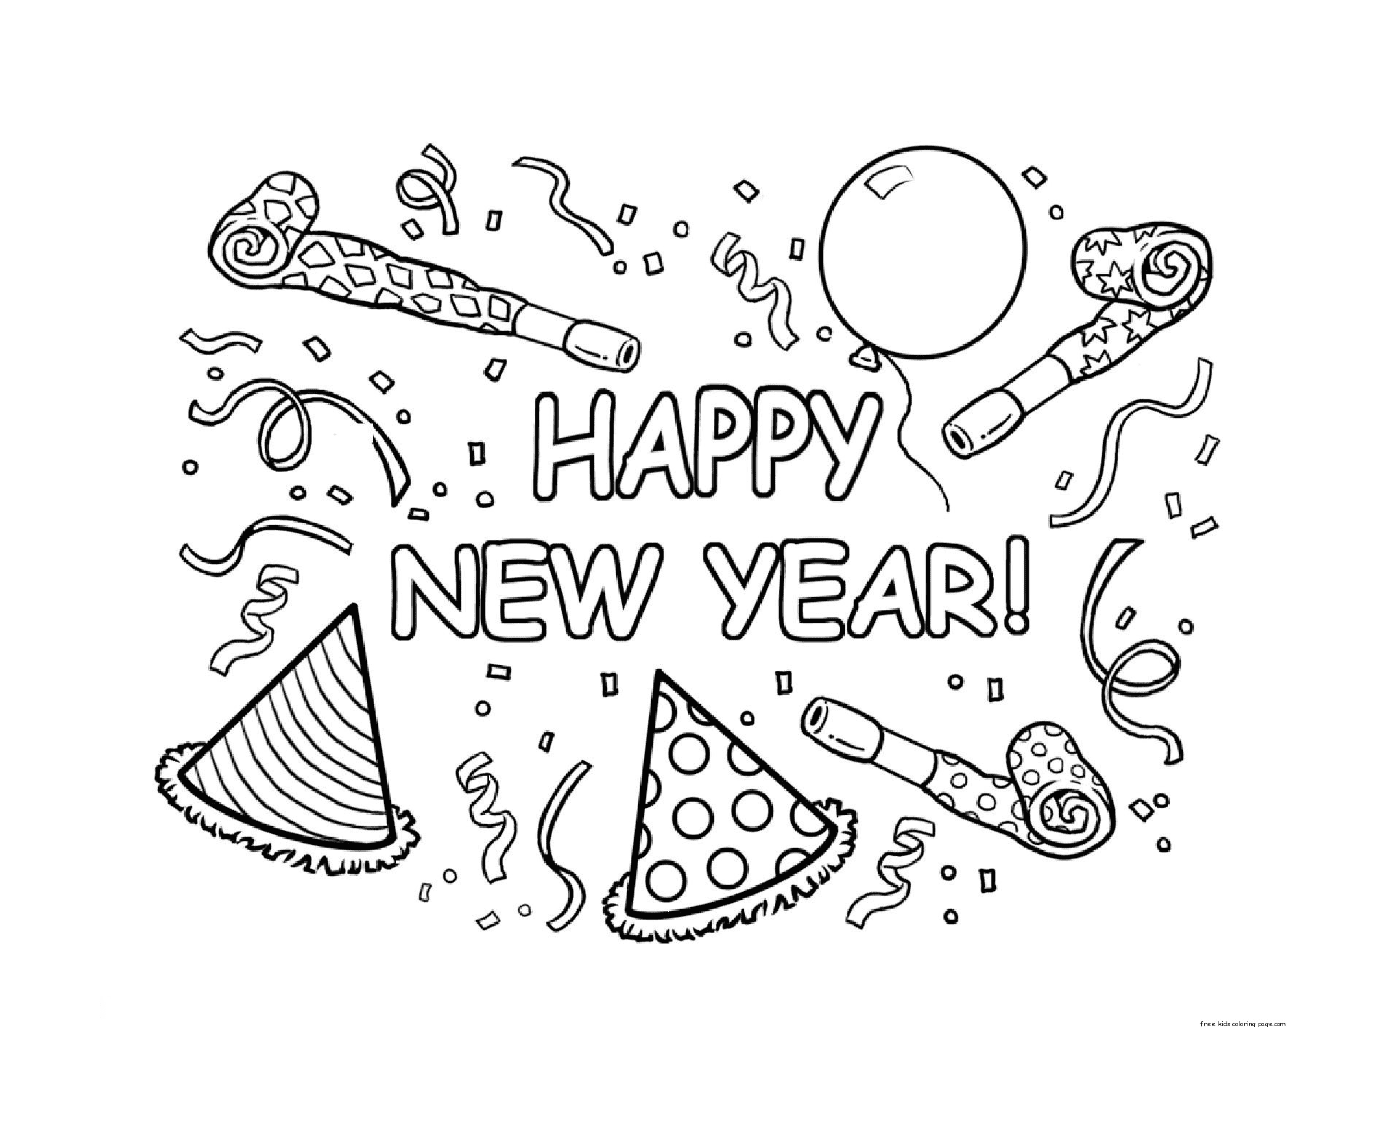  Printable design for the happy New Year 